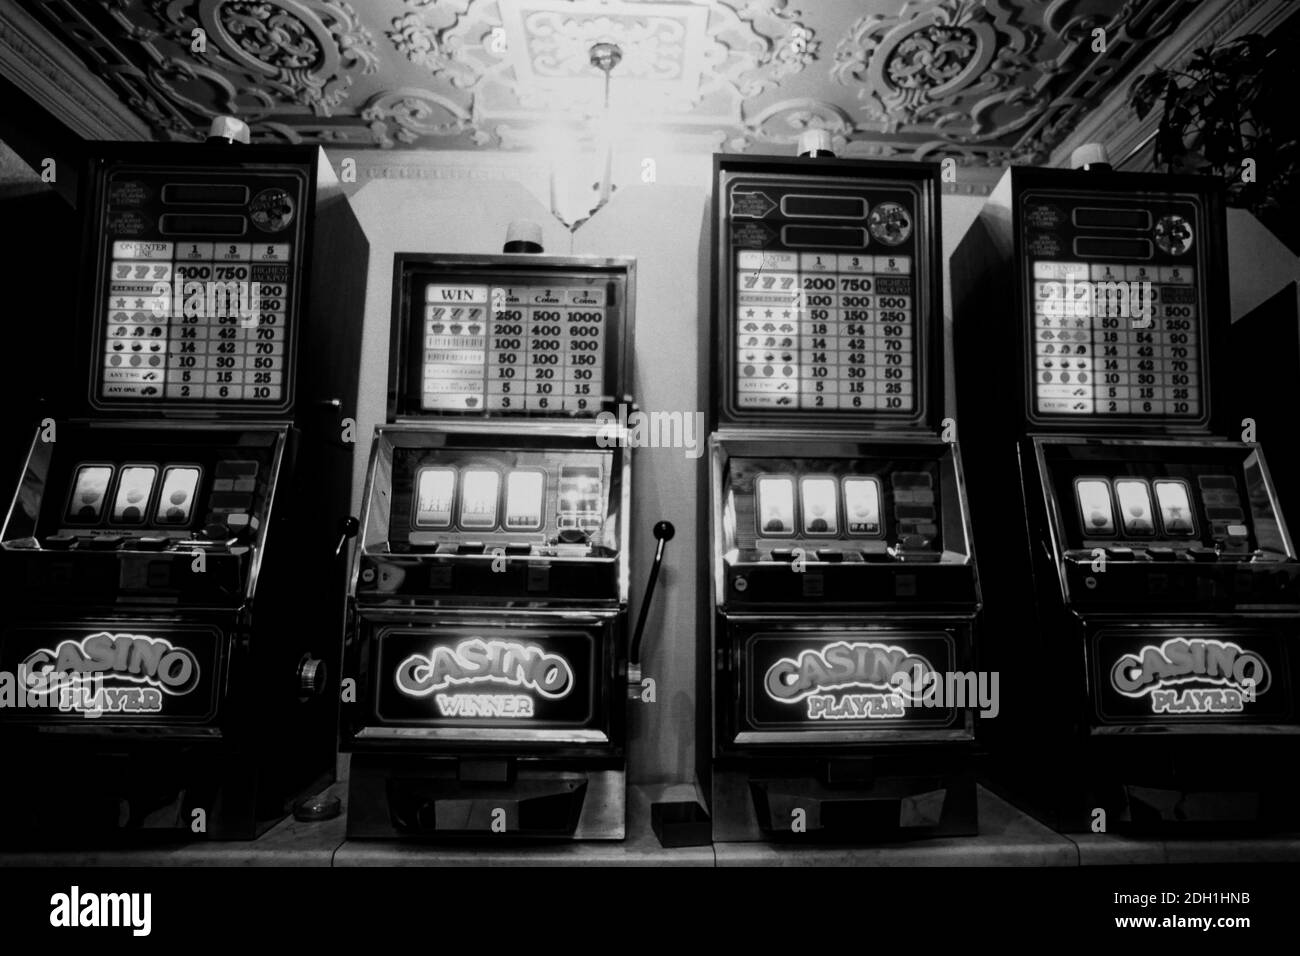 Slot machines, Moscow, CEI, former USSR, 1991 Stock Photo